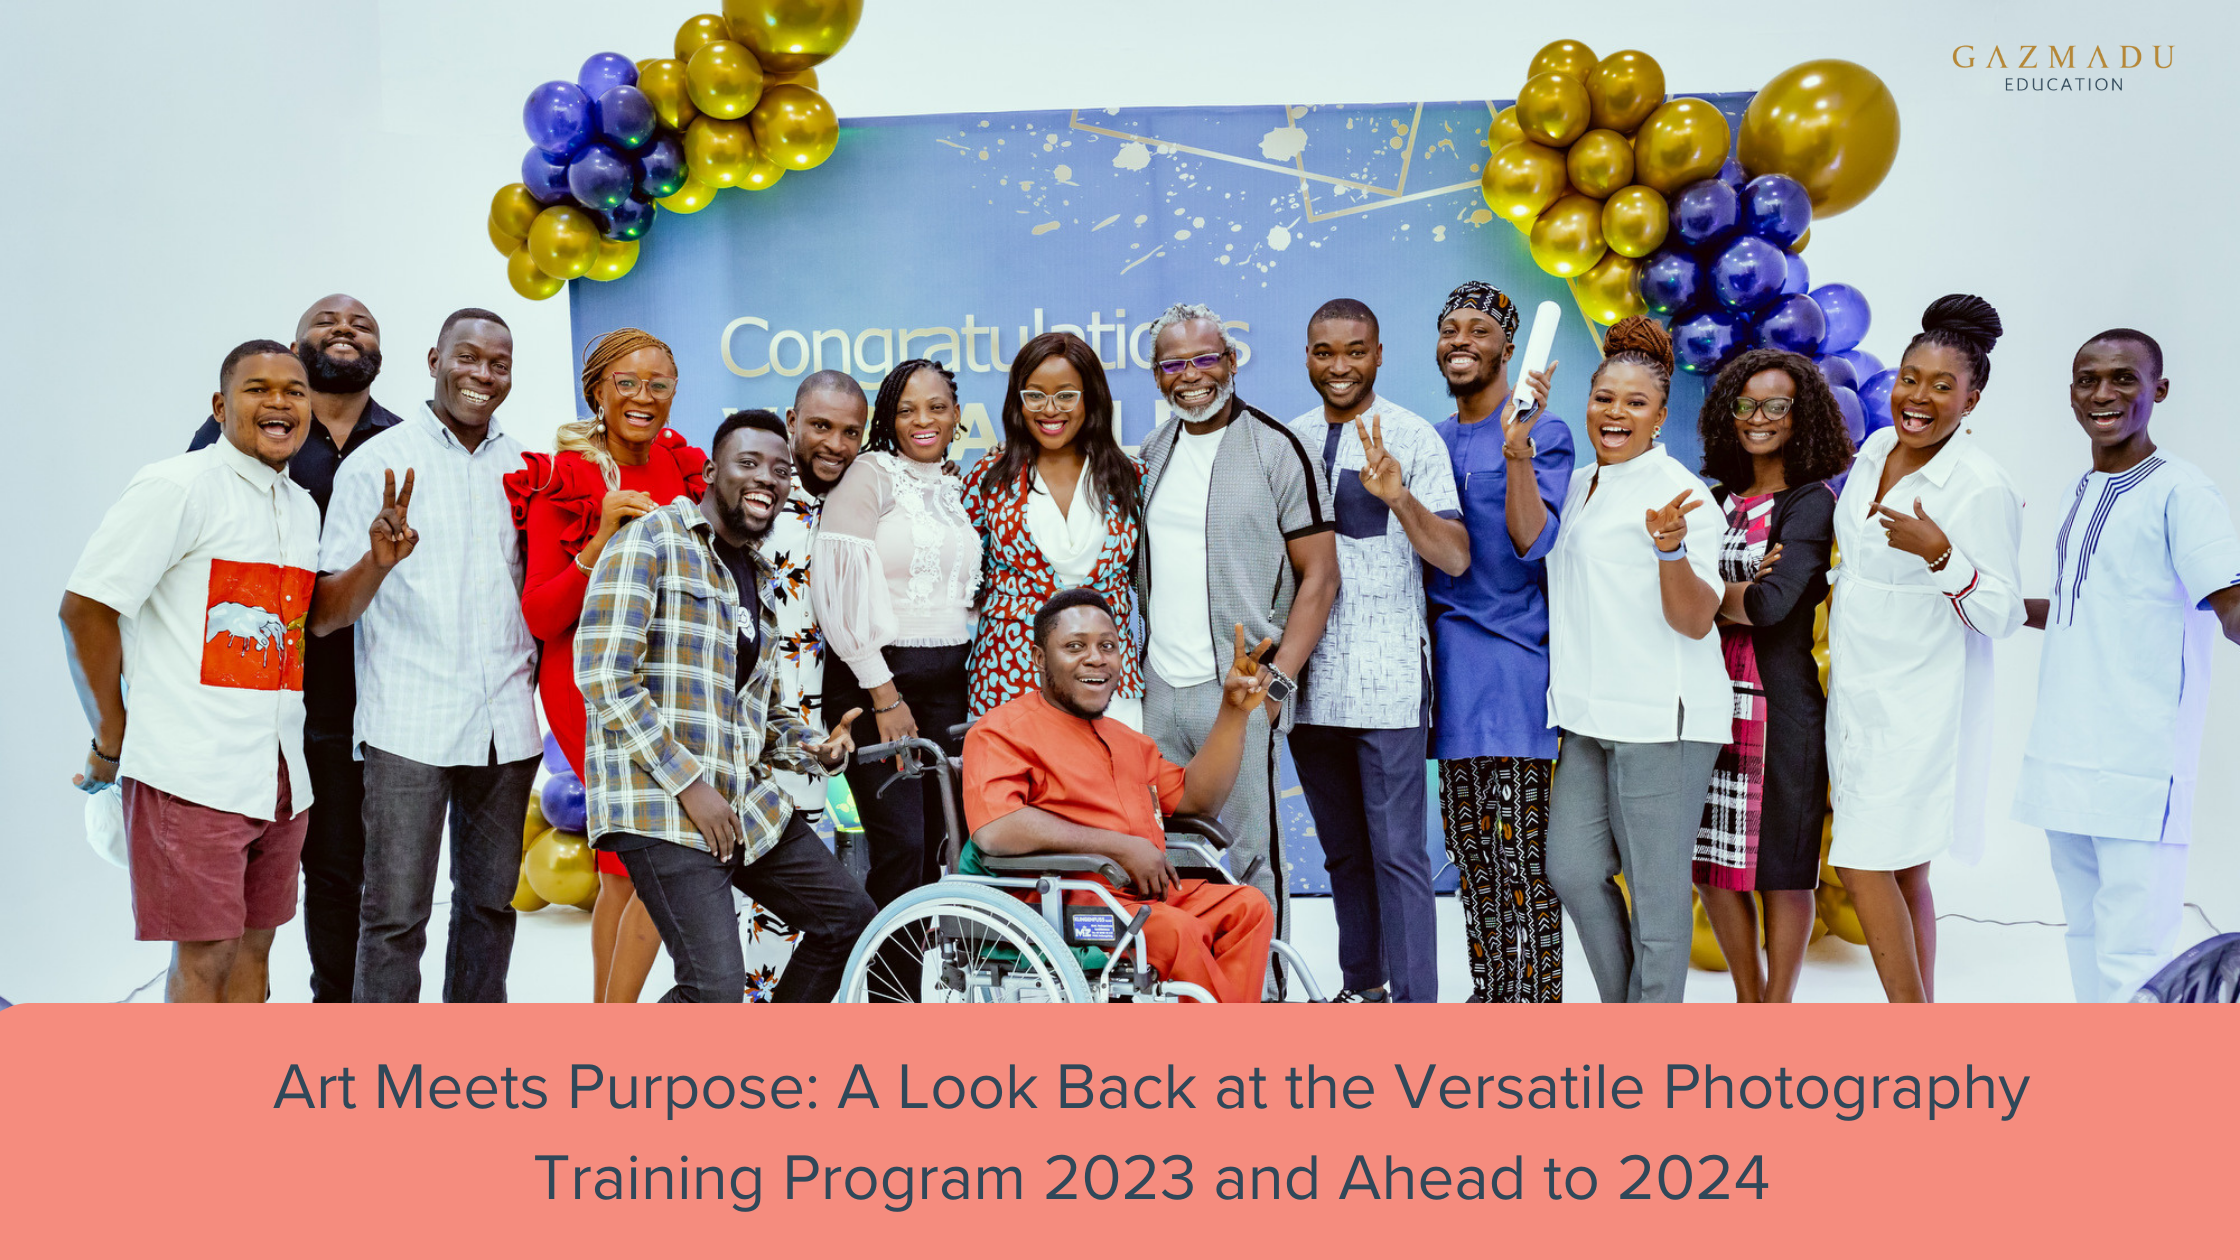 Art Meets Purpose: A Look Back at the Versatile Photography Training Program 2023 and Ahead to 2024